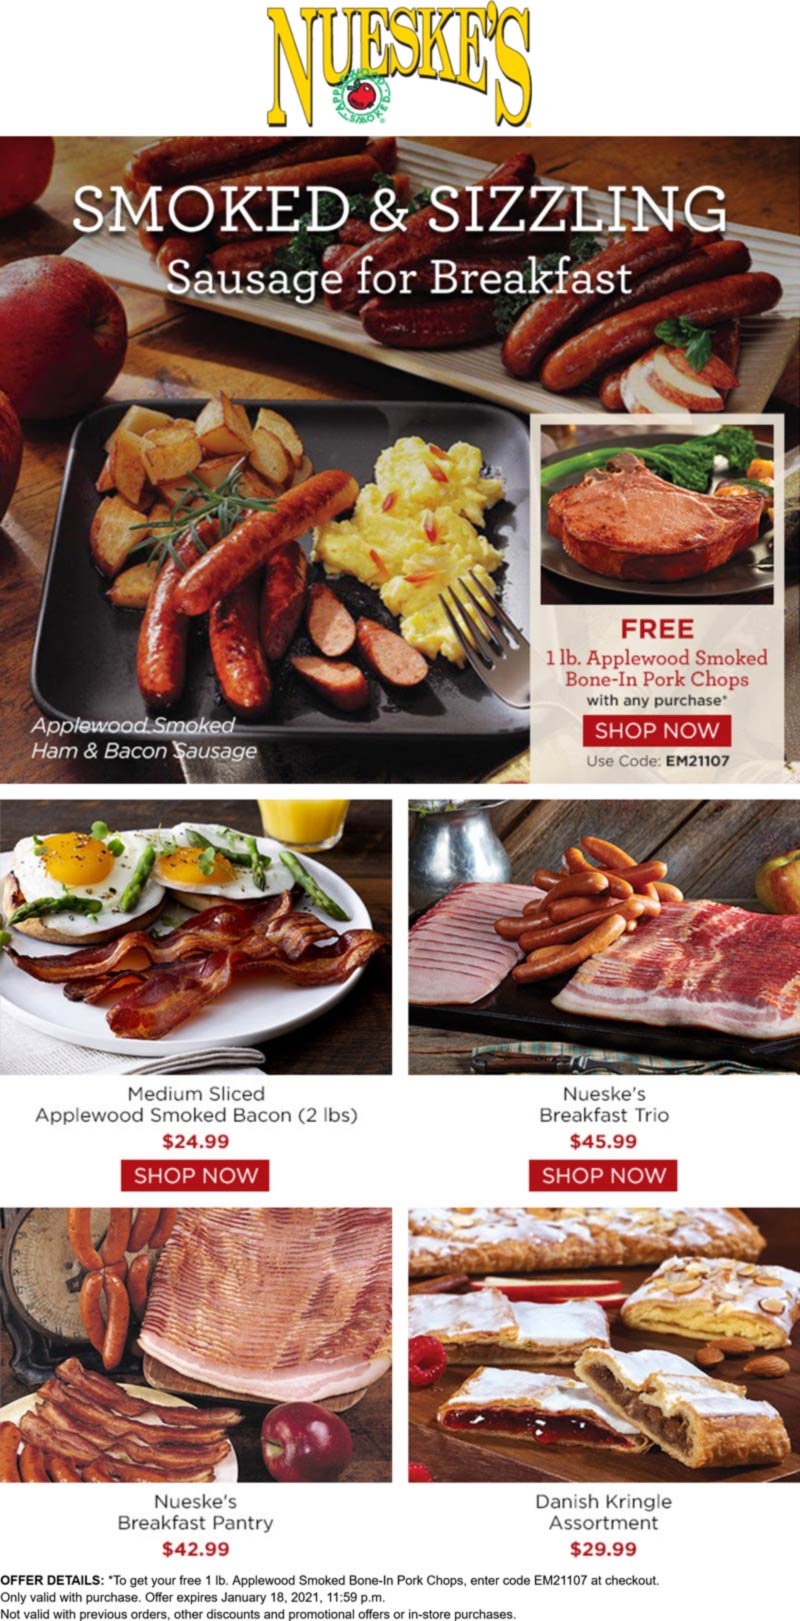 Nueskes restaurants Coupon  Free 1lb of smoked pork chops with any order at Nueskes via promo code EM21107 #nueskes 